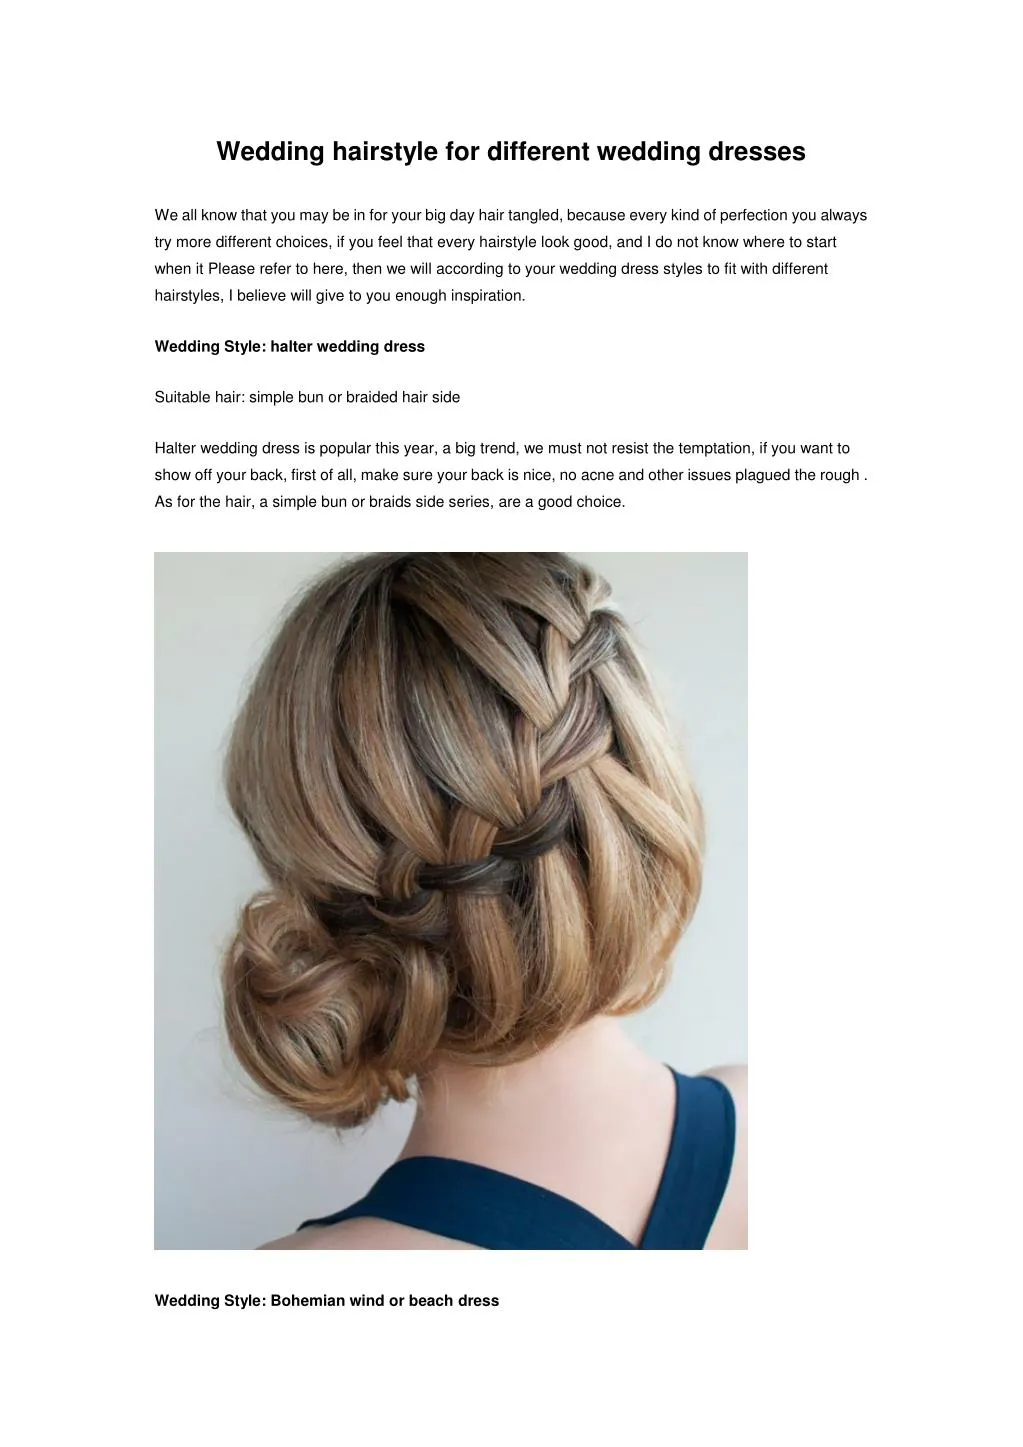 PPT - Wedding hairstyle for different wedding dresses PowerPoint  Presentation - ID:7239466